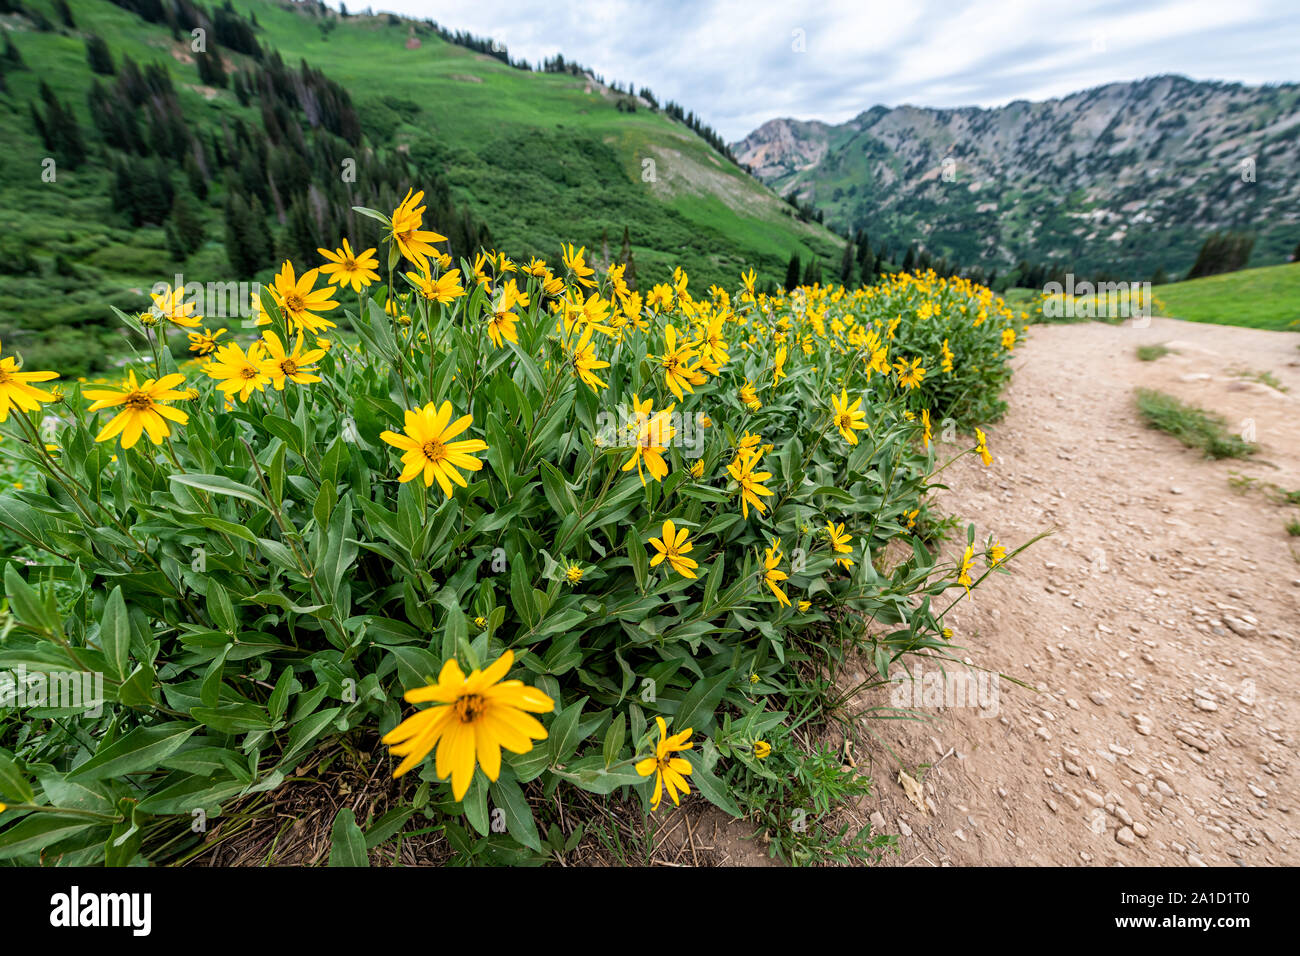 Albion Basin, Utah summer 2019 meadows trail wide angle view of many yellow Arnica sunflowers flowers in wildflowers season in Wasatch mountains Stock Photo